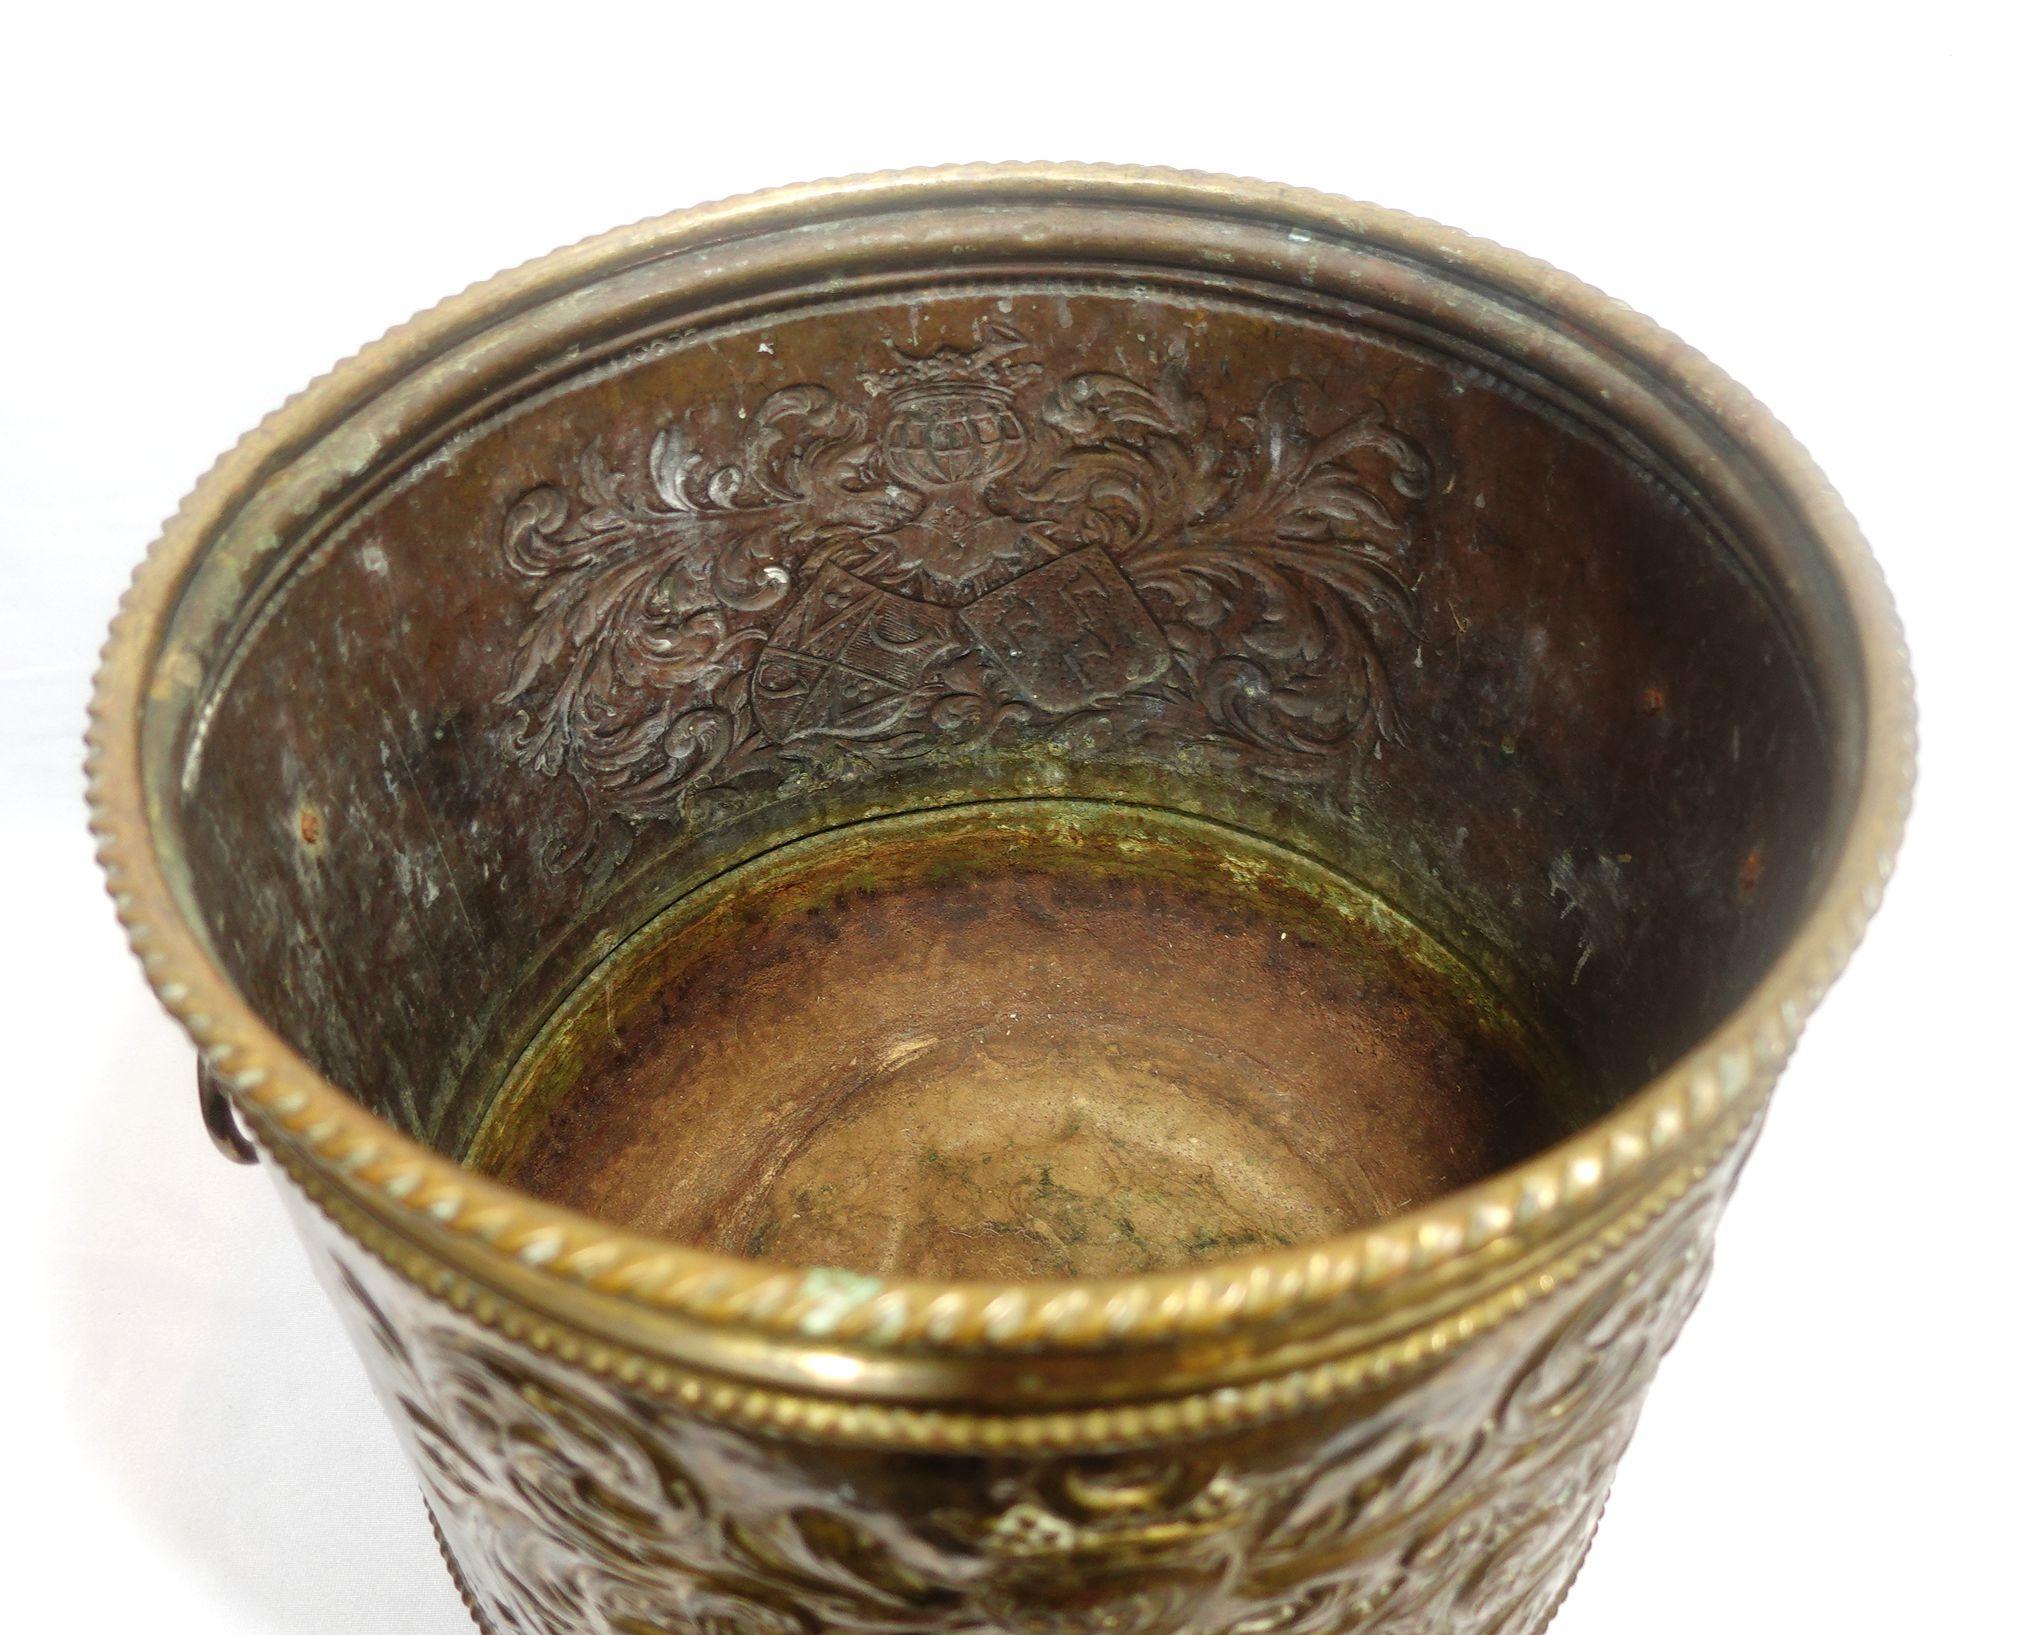 Hand-Crafted Antique Large Brass Firewood Bucket w/Repousse Armorial Pattern (14-CB4) 19th C.